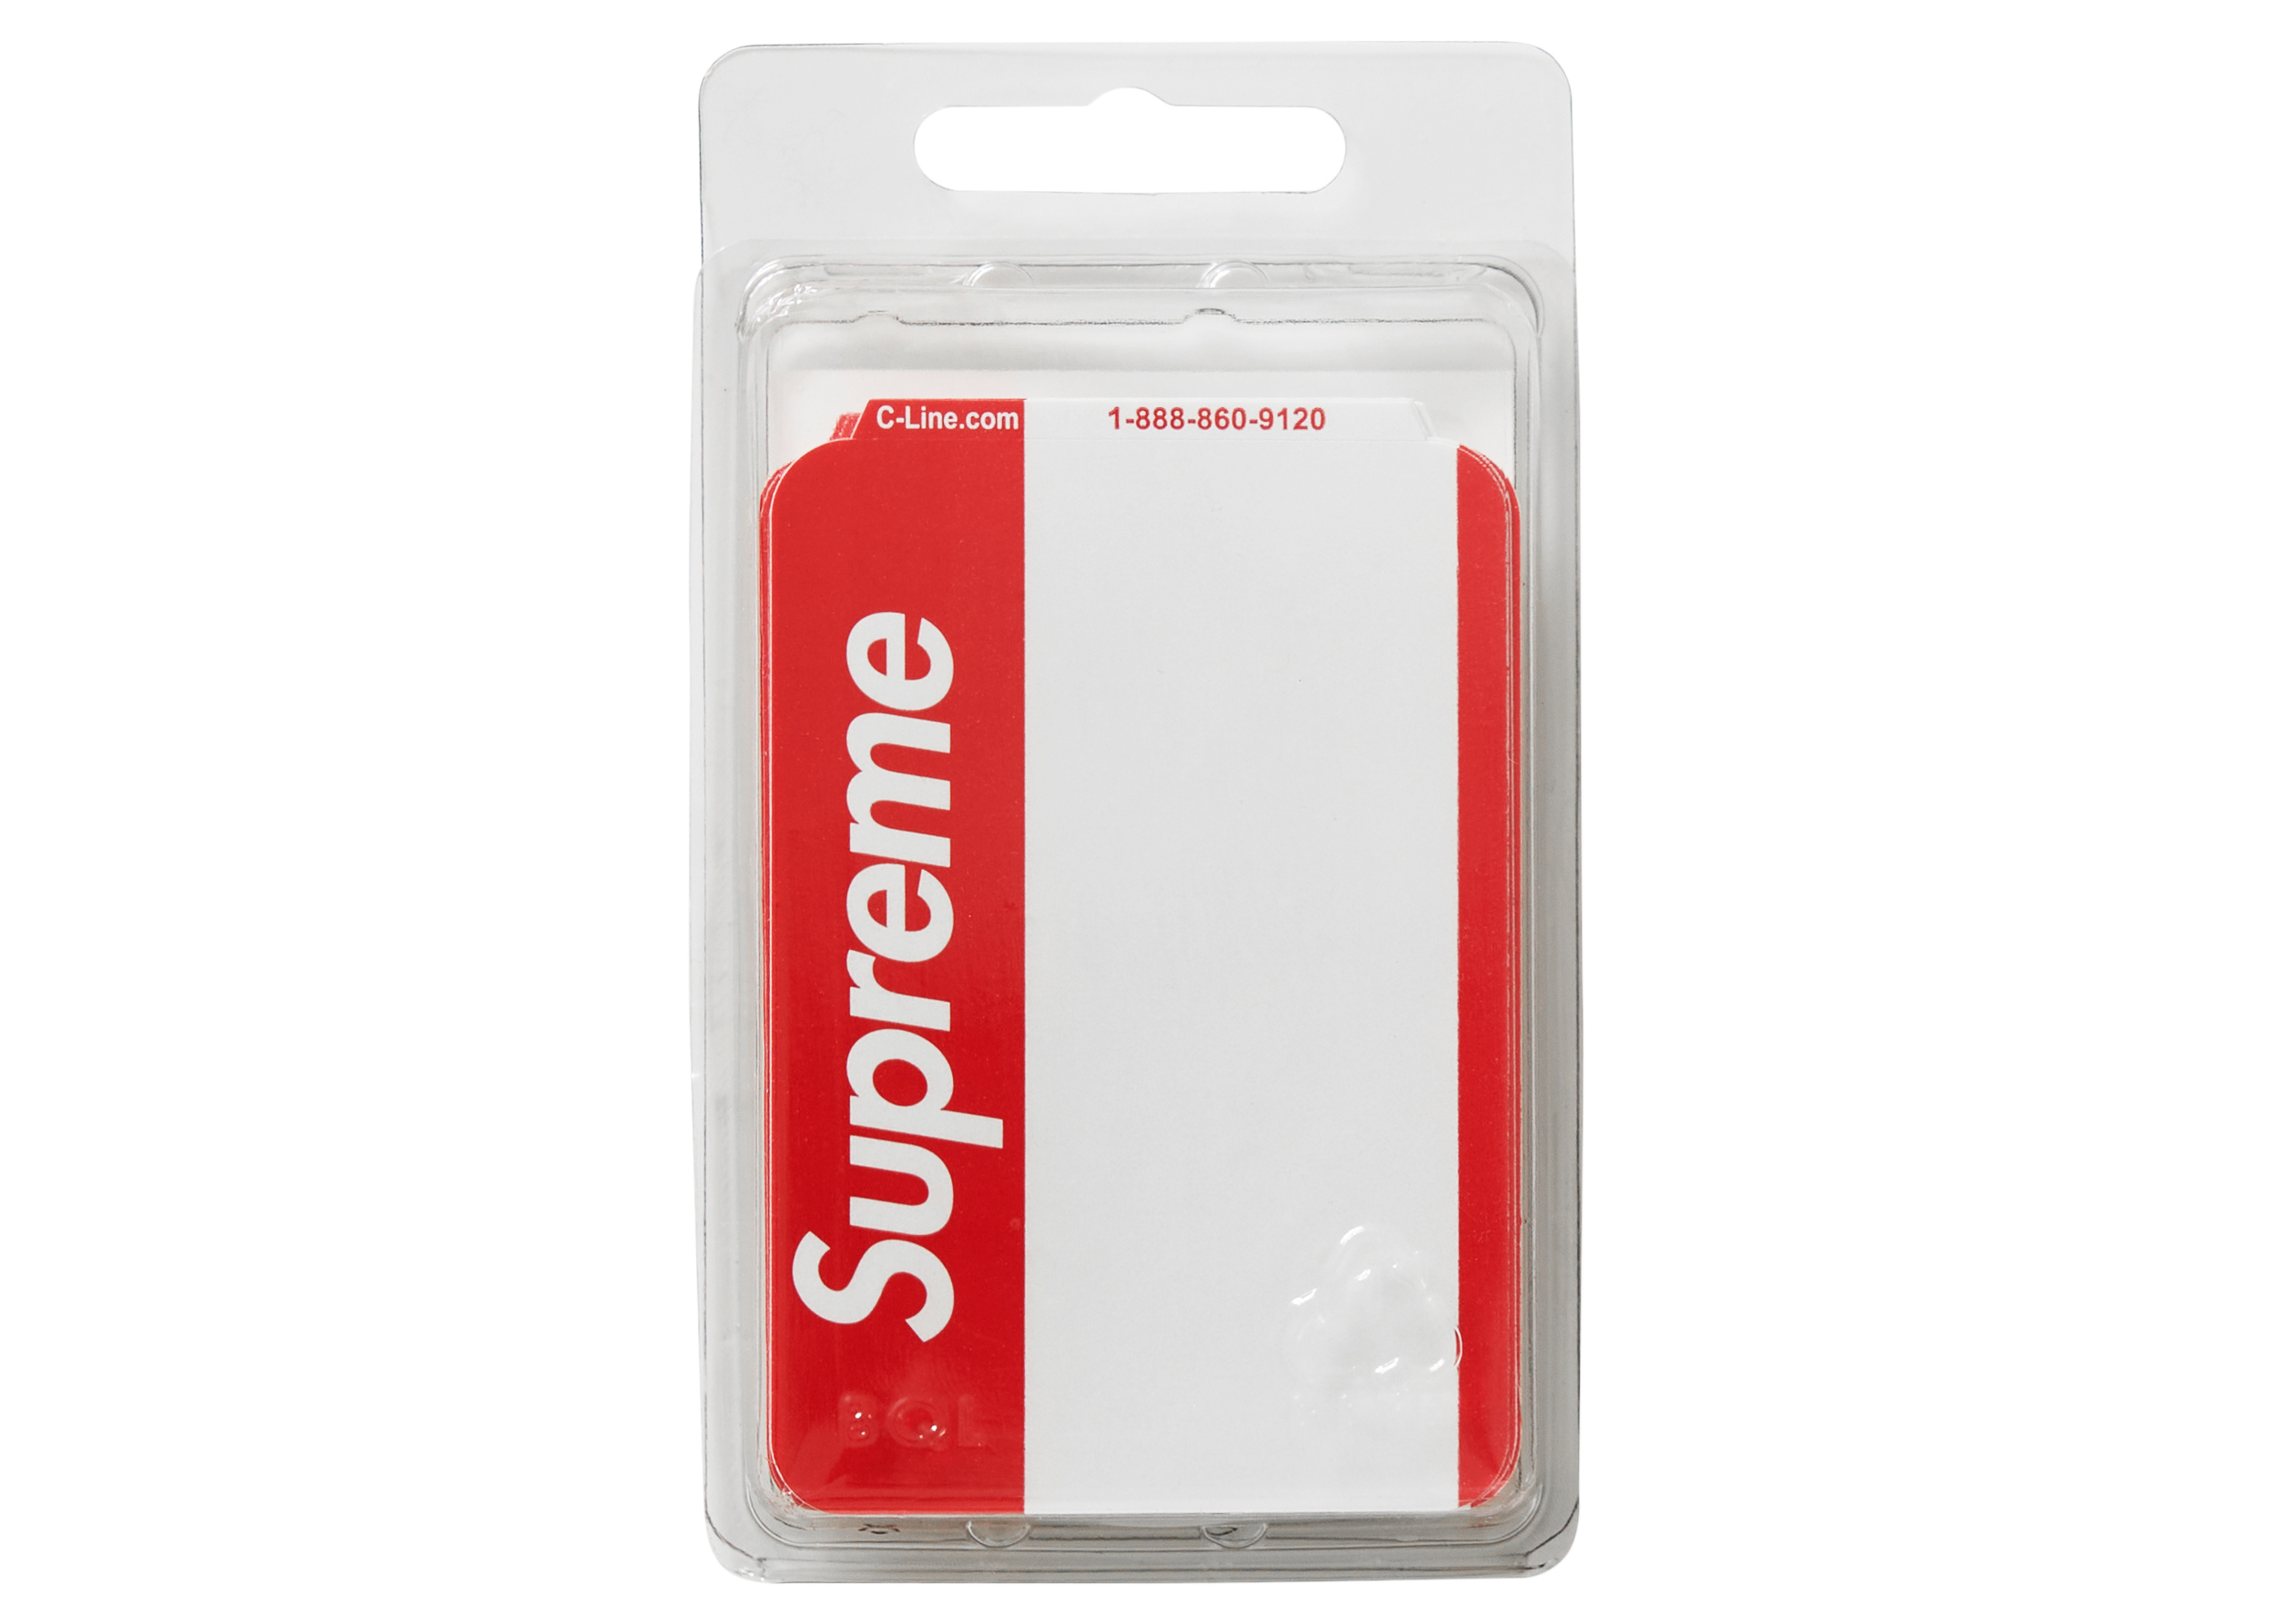 7 Supreme Stickers In Pic Supreme Green Name Badge Stickers Pack of 20 Total